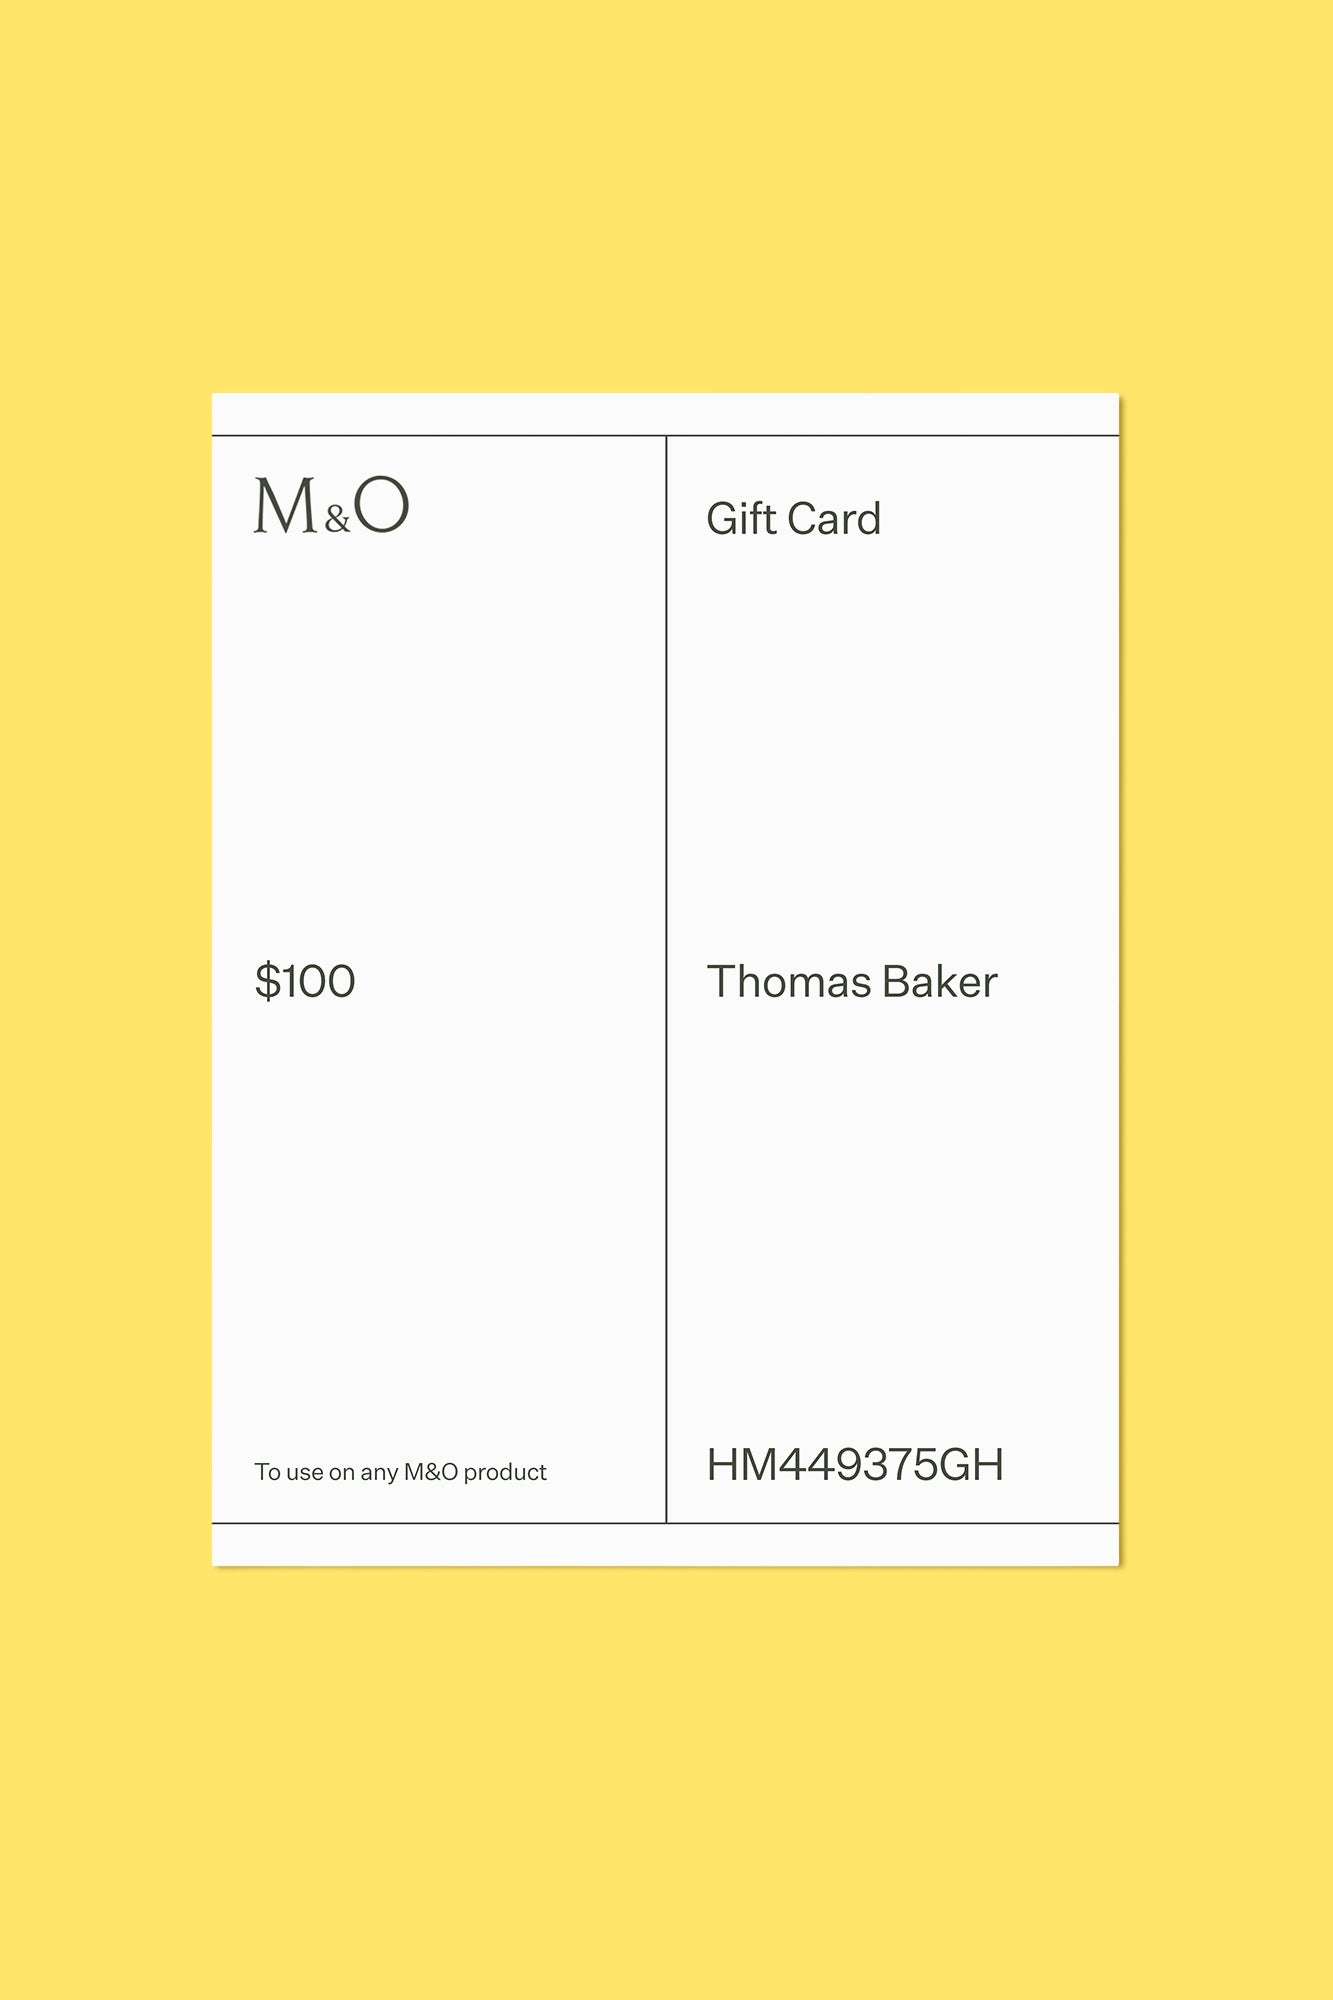 M&O online gift card